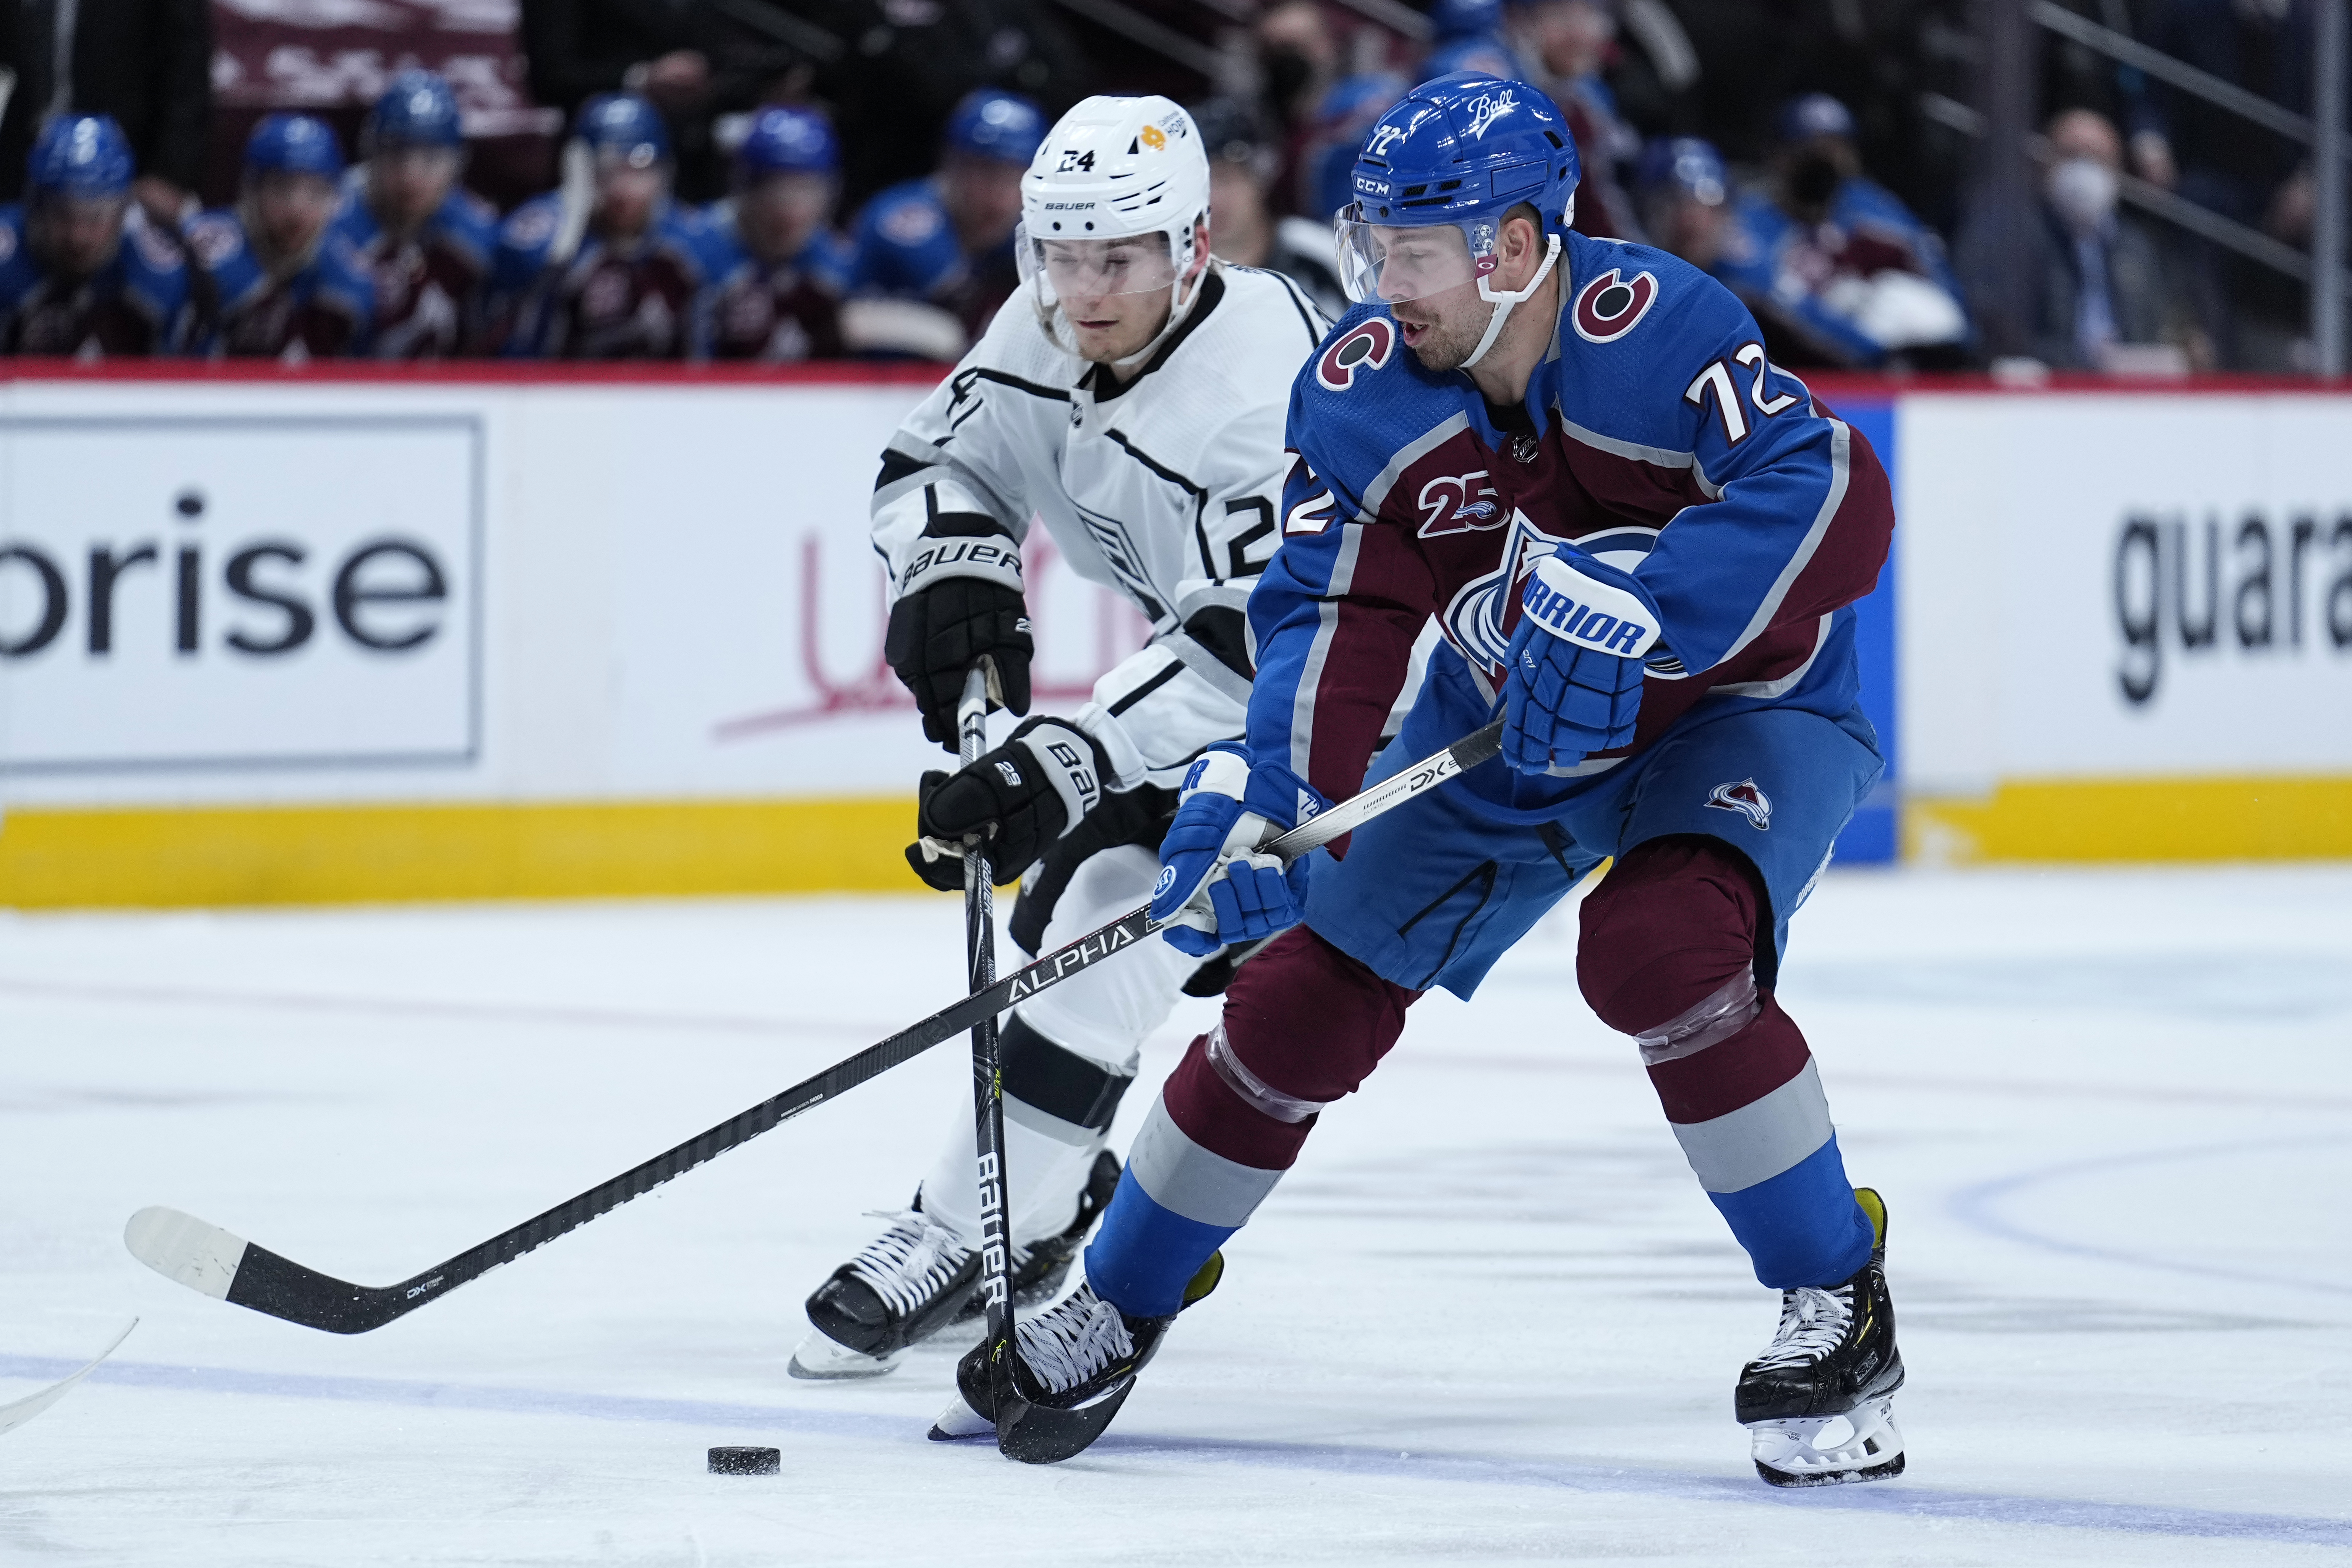 NHL Stadium Series 2020: TV channel, time, how to watch Kings vs. Avalanche